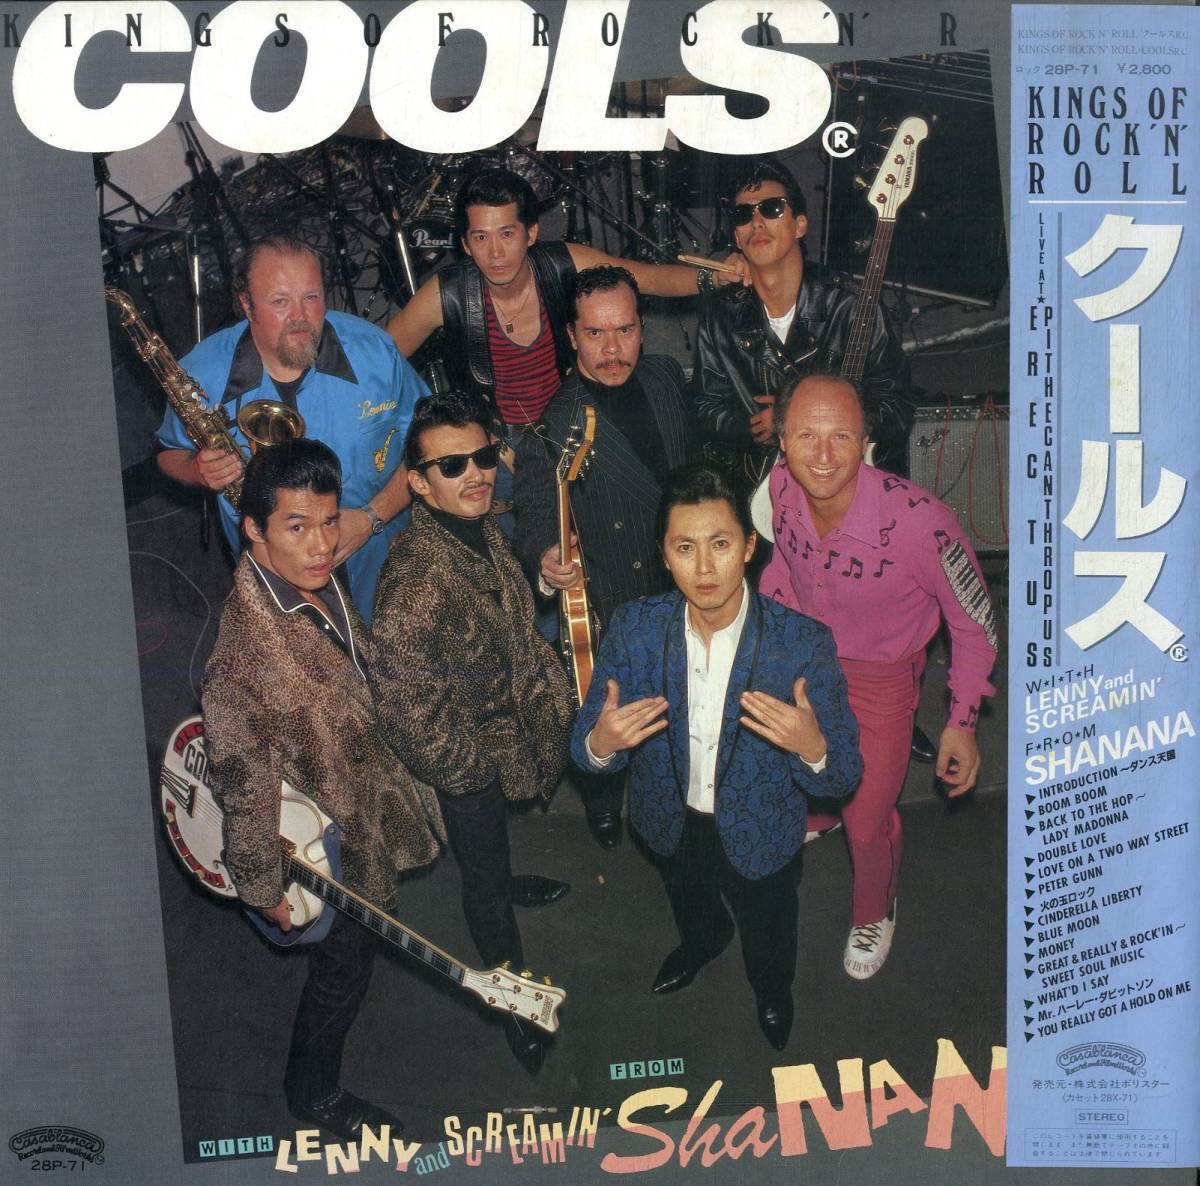 A00577761/LP/クールス With Lenny And Screamin From Shanana「Kings Rockn Roll(1981年：28P-71)」_画像1